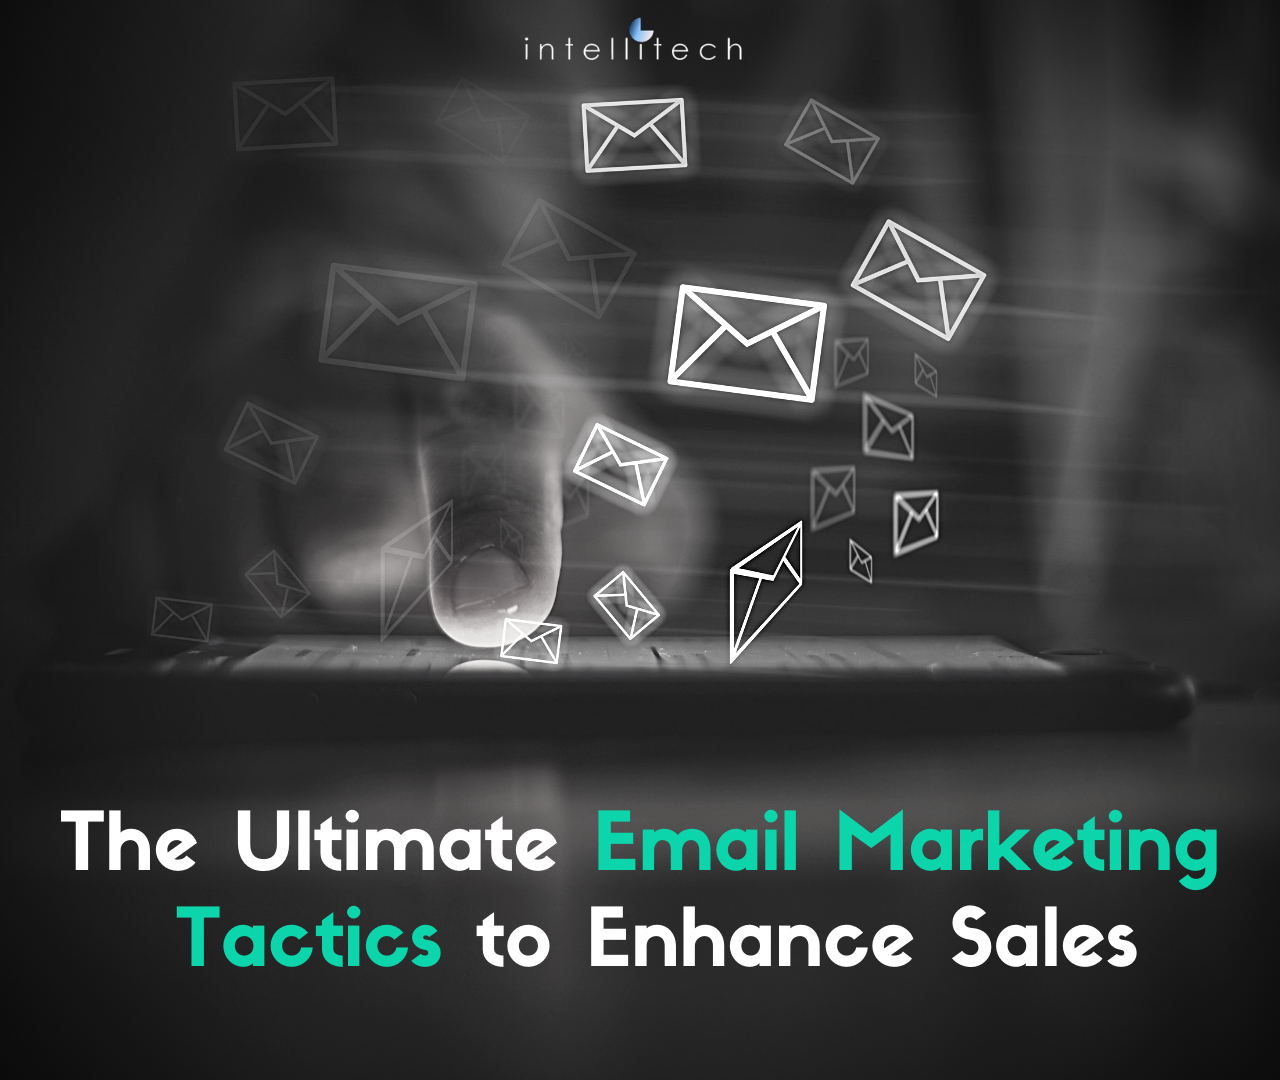 The Ultimate Email Marketing Tactics to Enhance Sales